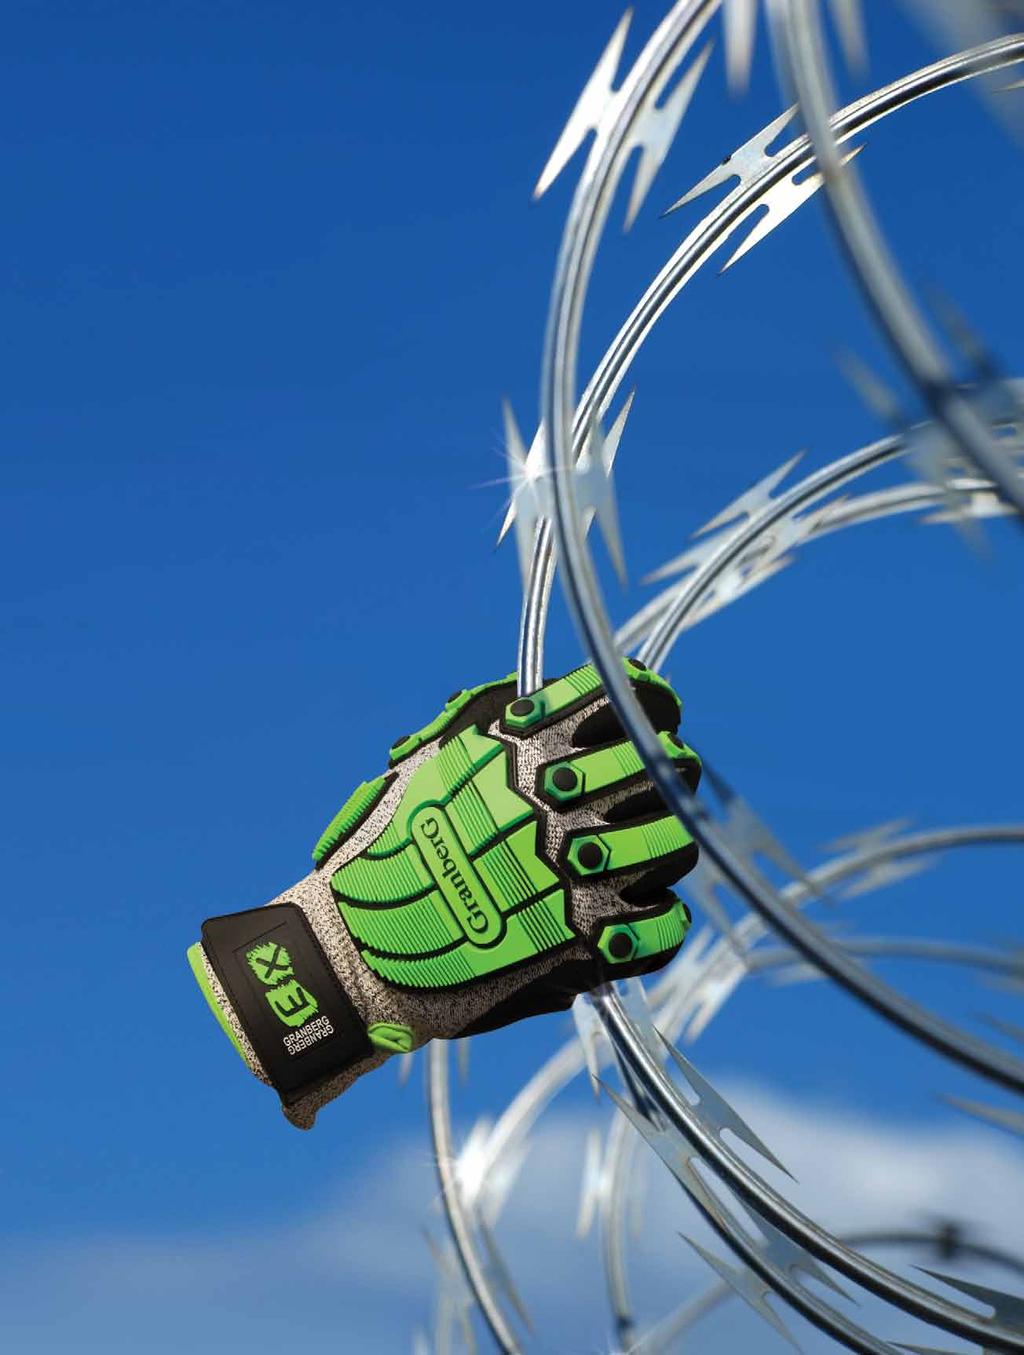 6.0 Cut-Resistant Gloves The most important reason to buy cut-resistant gloves is to make sure employees are protected against injuries.